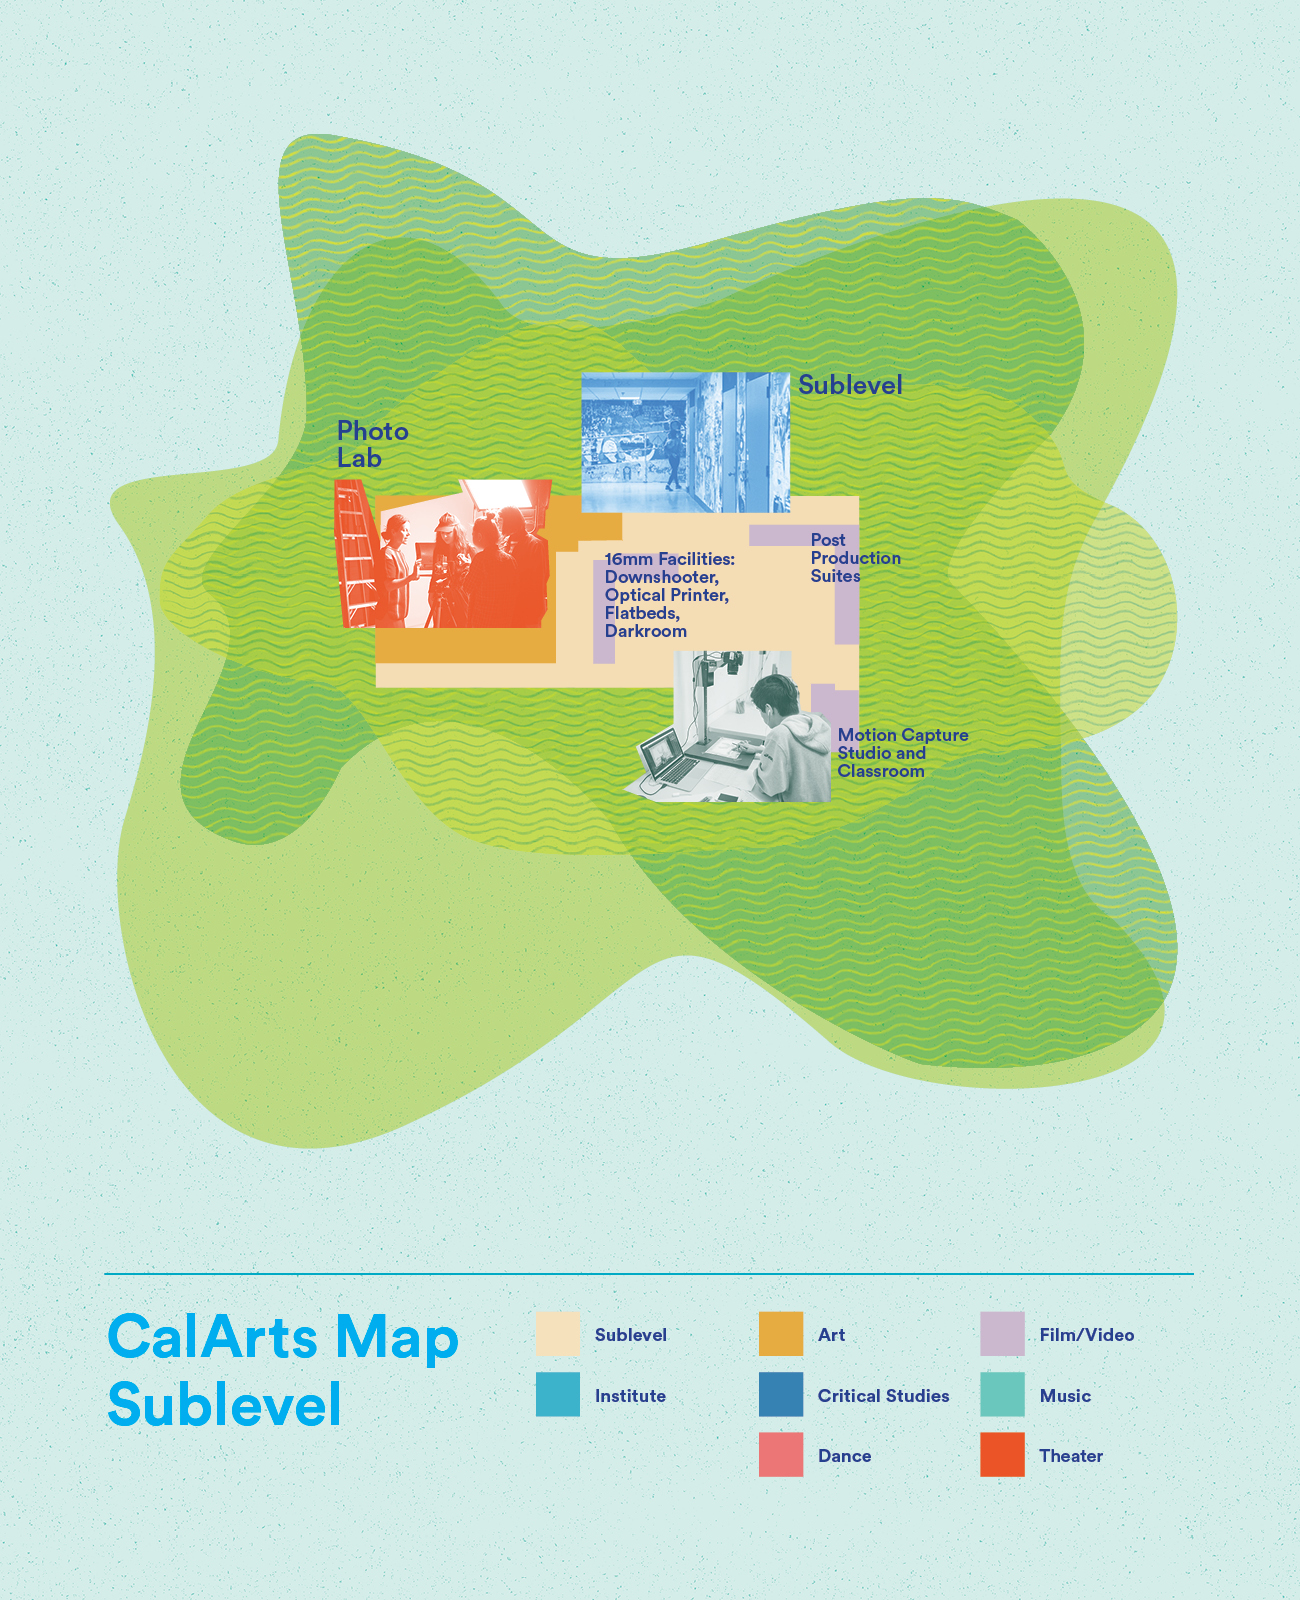 Map of the CalArts Sublevel